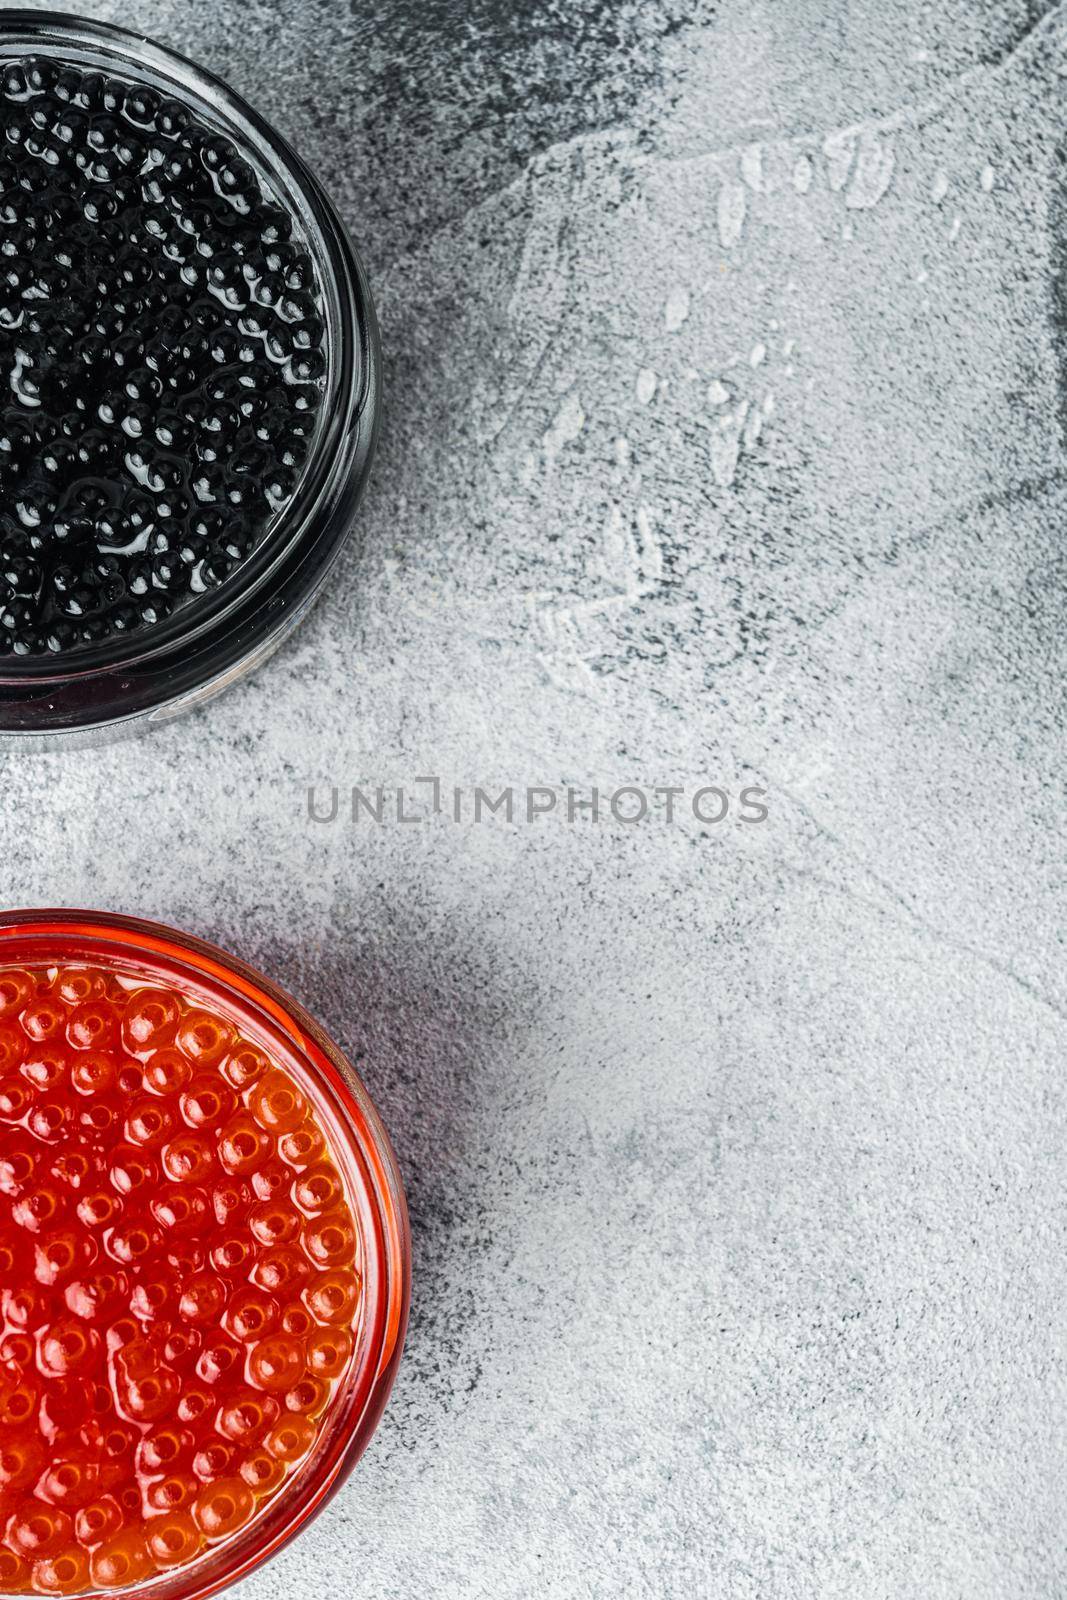 Red and black caviar in glass bowl, on gray background, top view flat lay with copy space for text